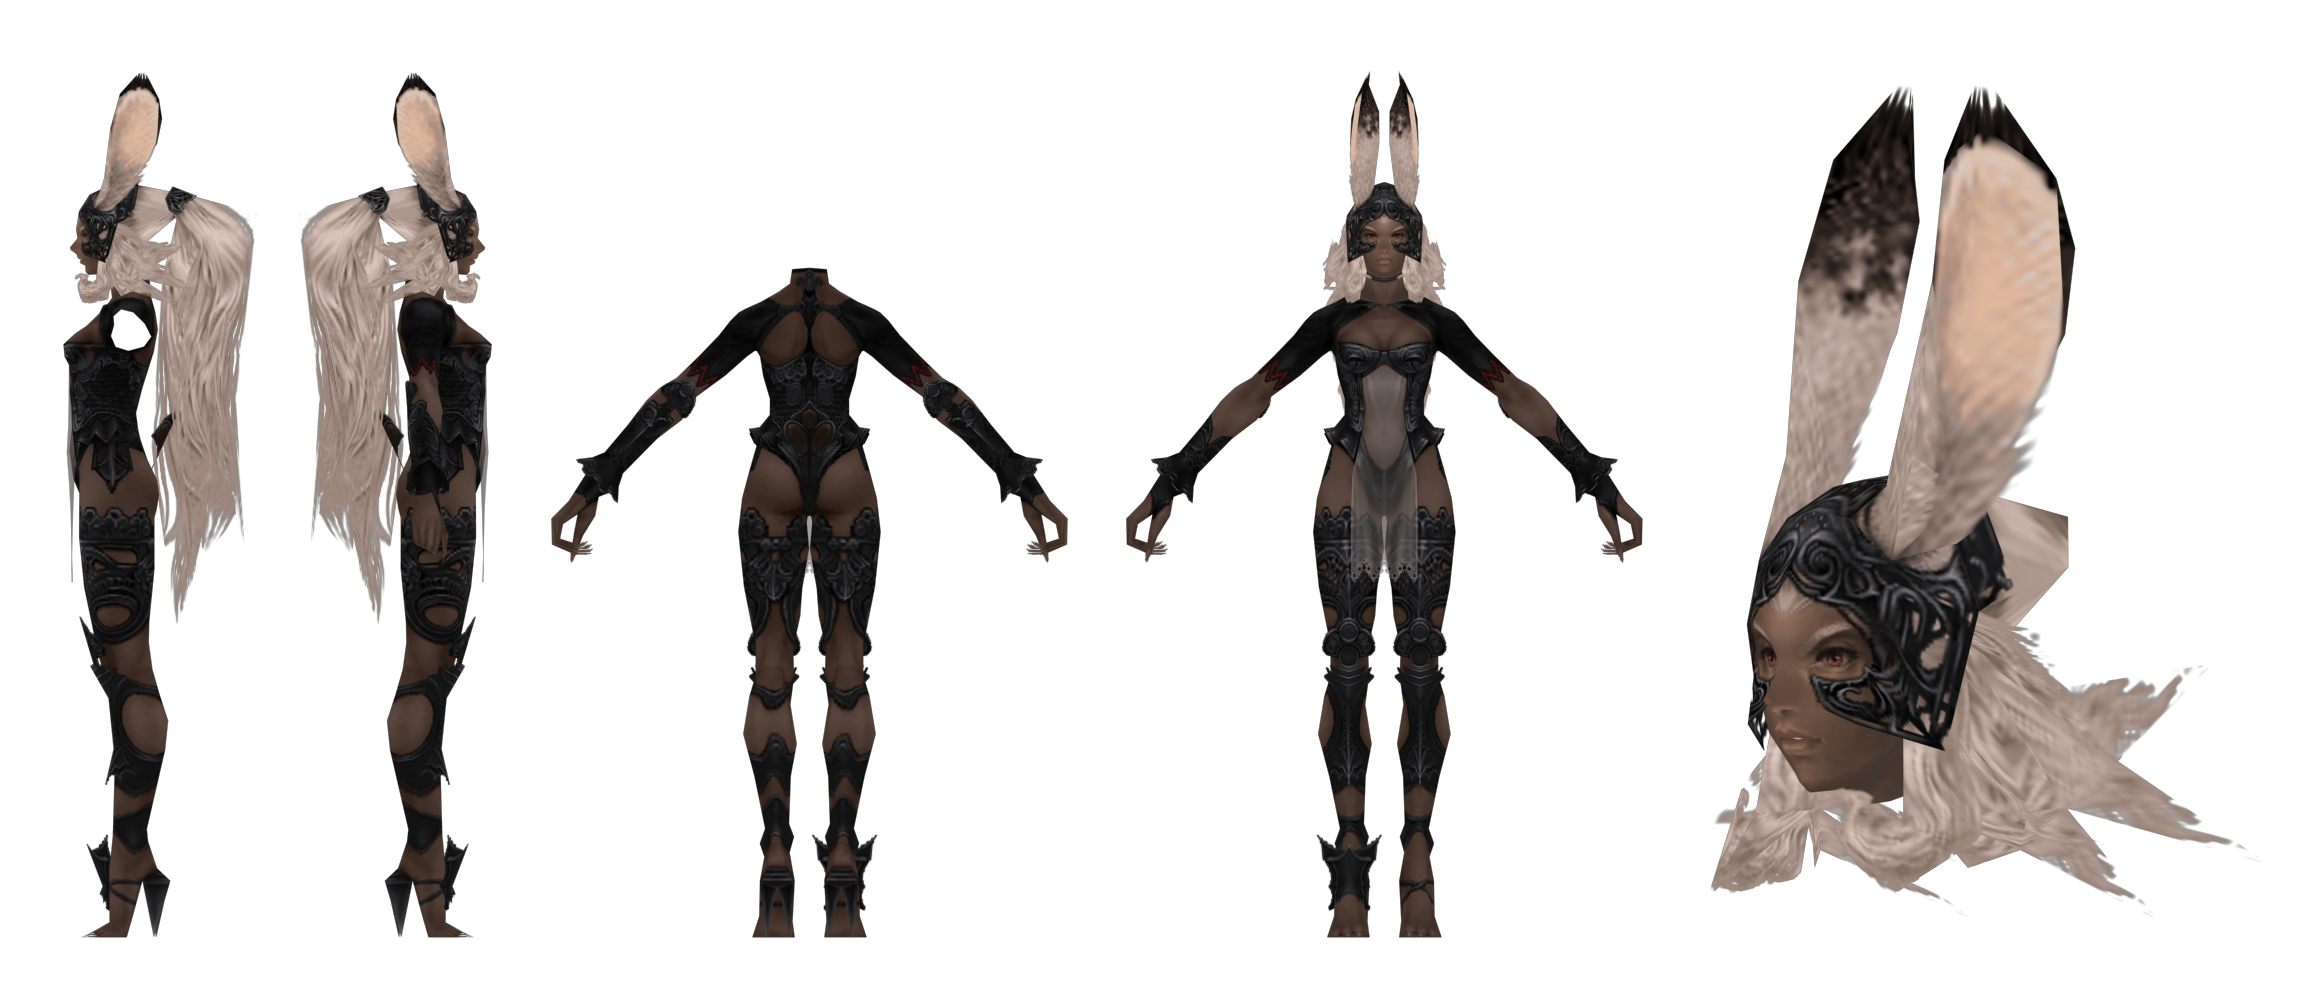 FFXII__Fran___Updated_by_CaptJapan.png